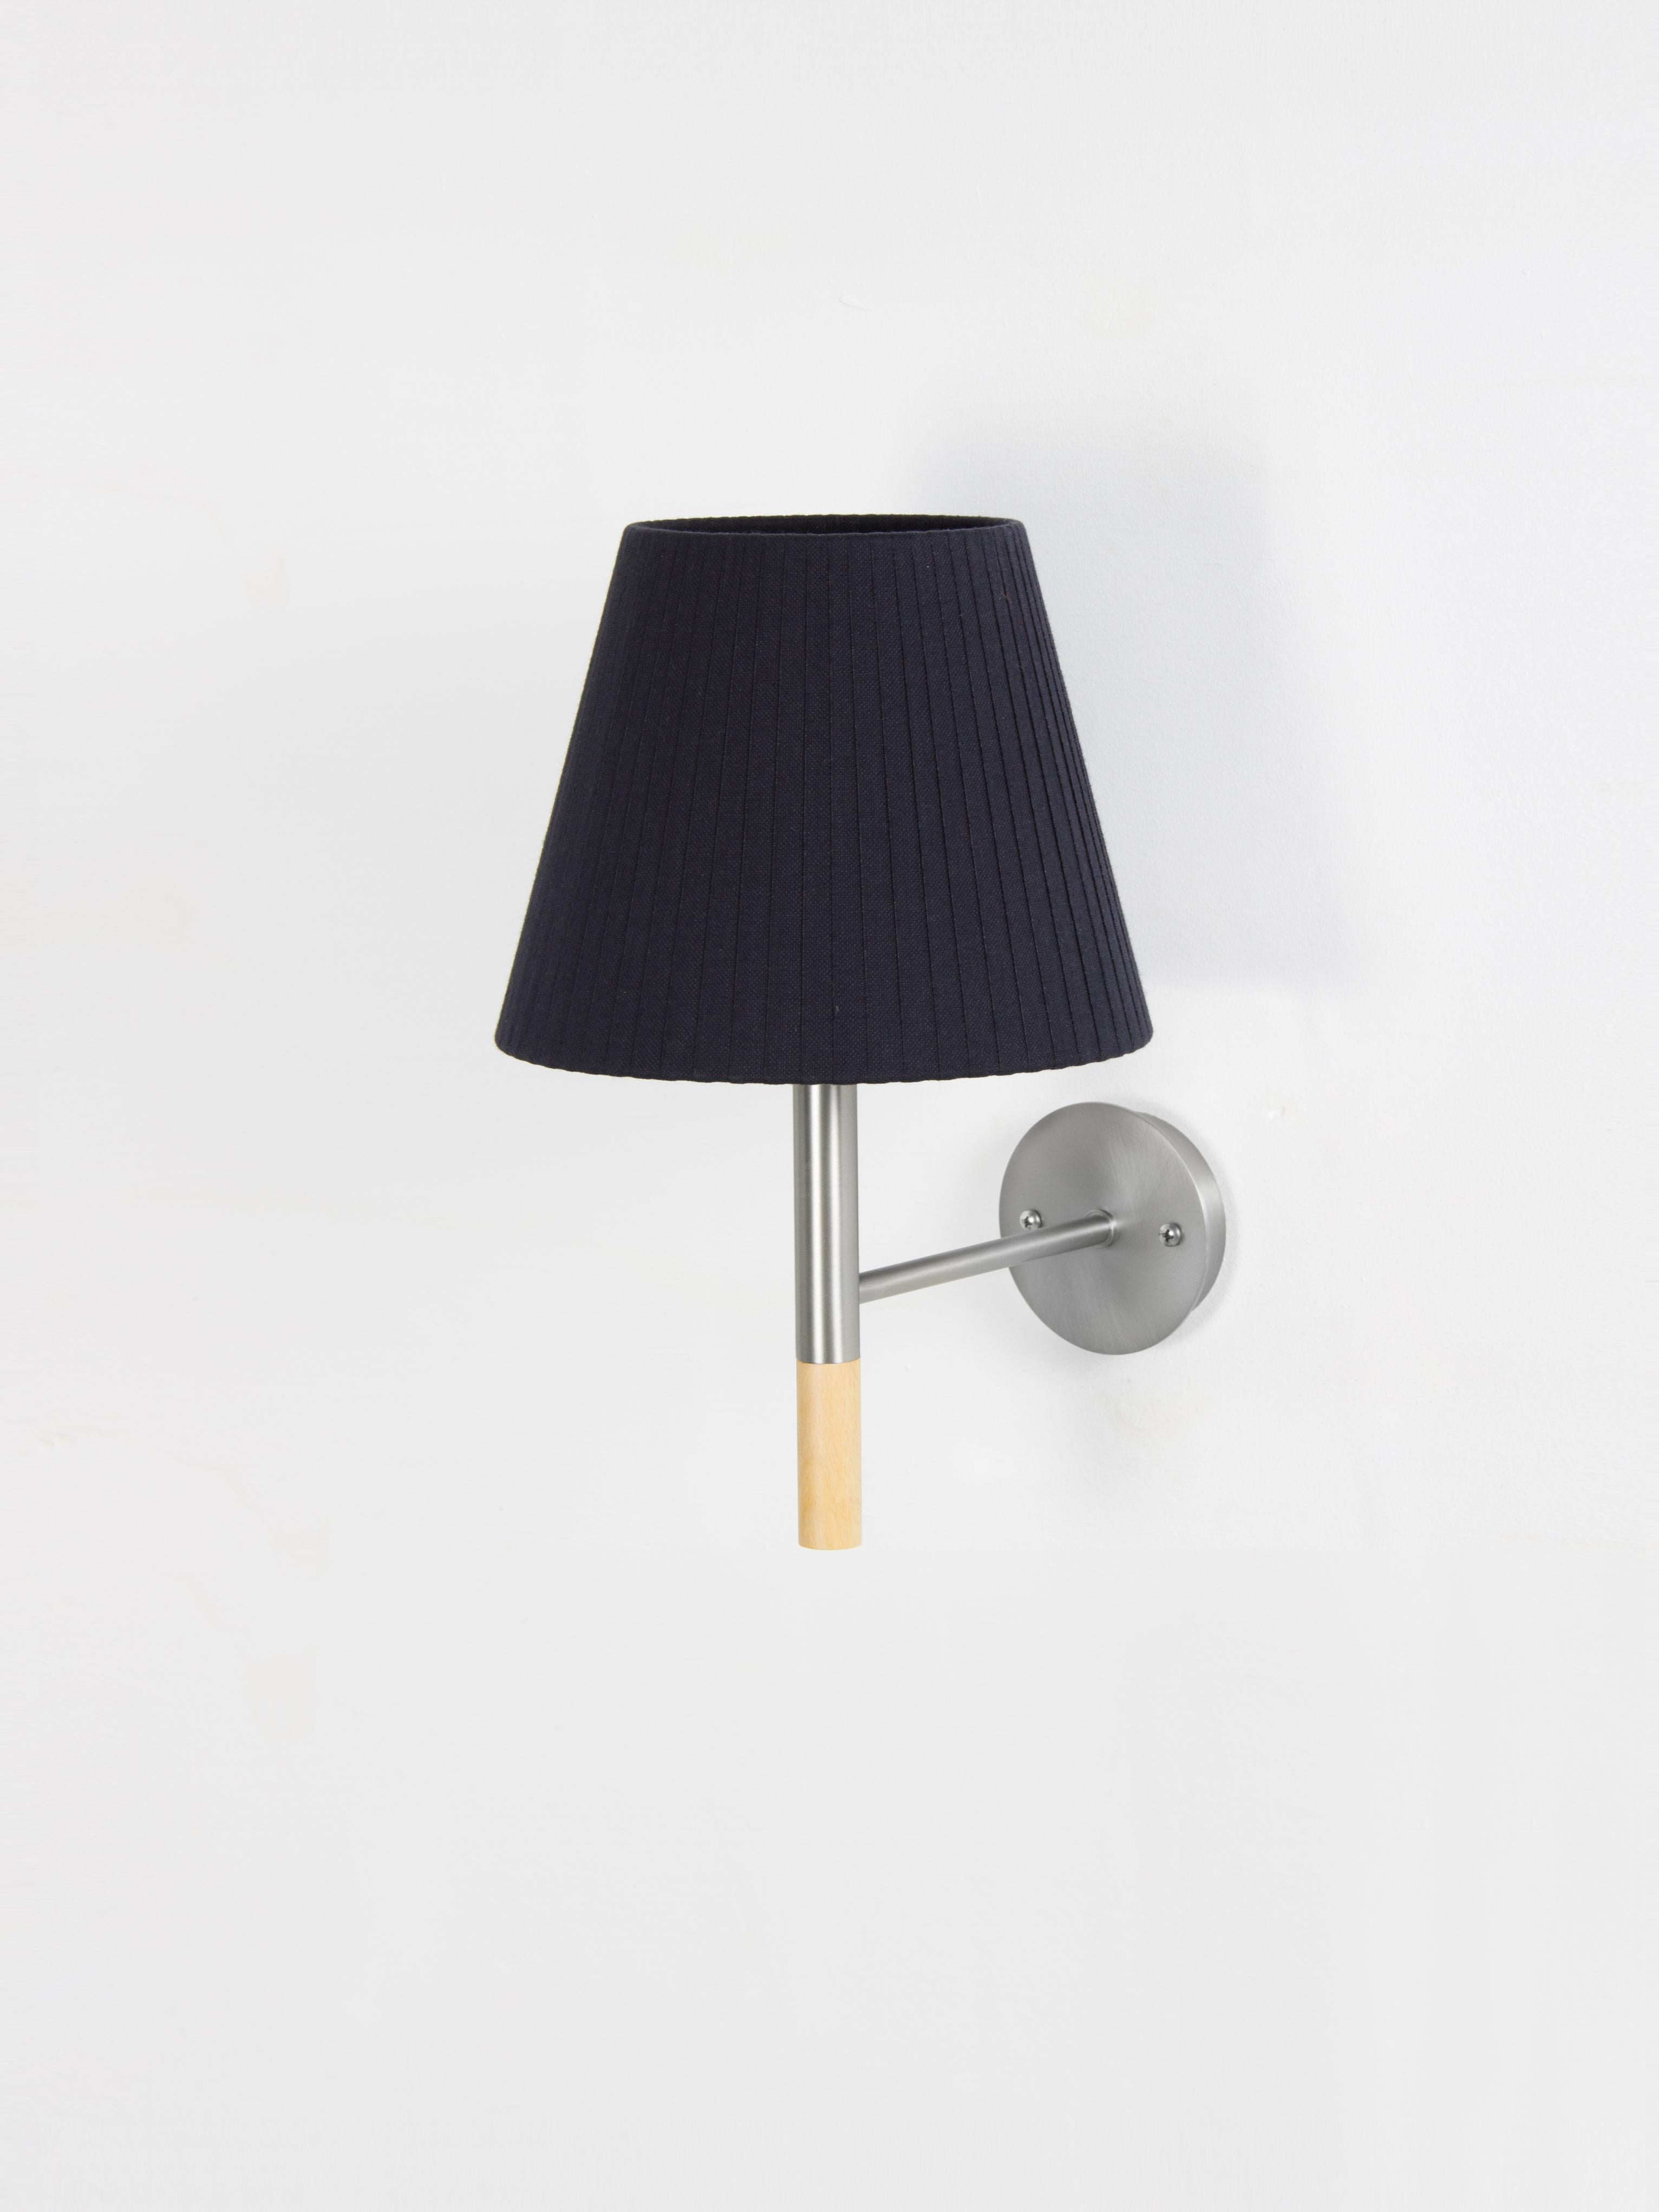 Black BC2 wall lamp by Santa & Cole
Dimensions: D 20 x W 26 x H 33 cm
Materials: Metal, beech wood, ribbon.

The BC1, BC2 and BC3 wall lamps are the epitome of sturdy construction, aesthetic sobriety and functional quality. Their various shade